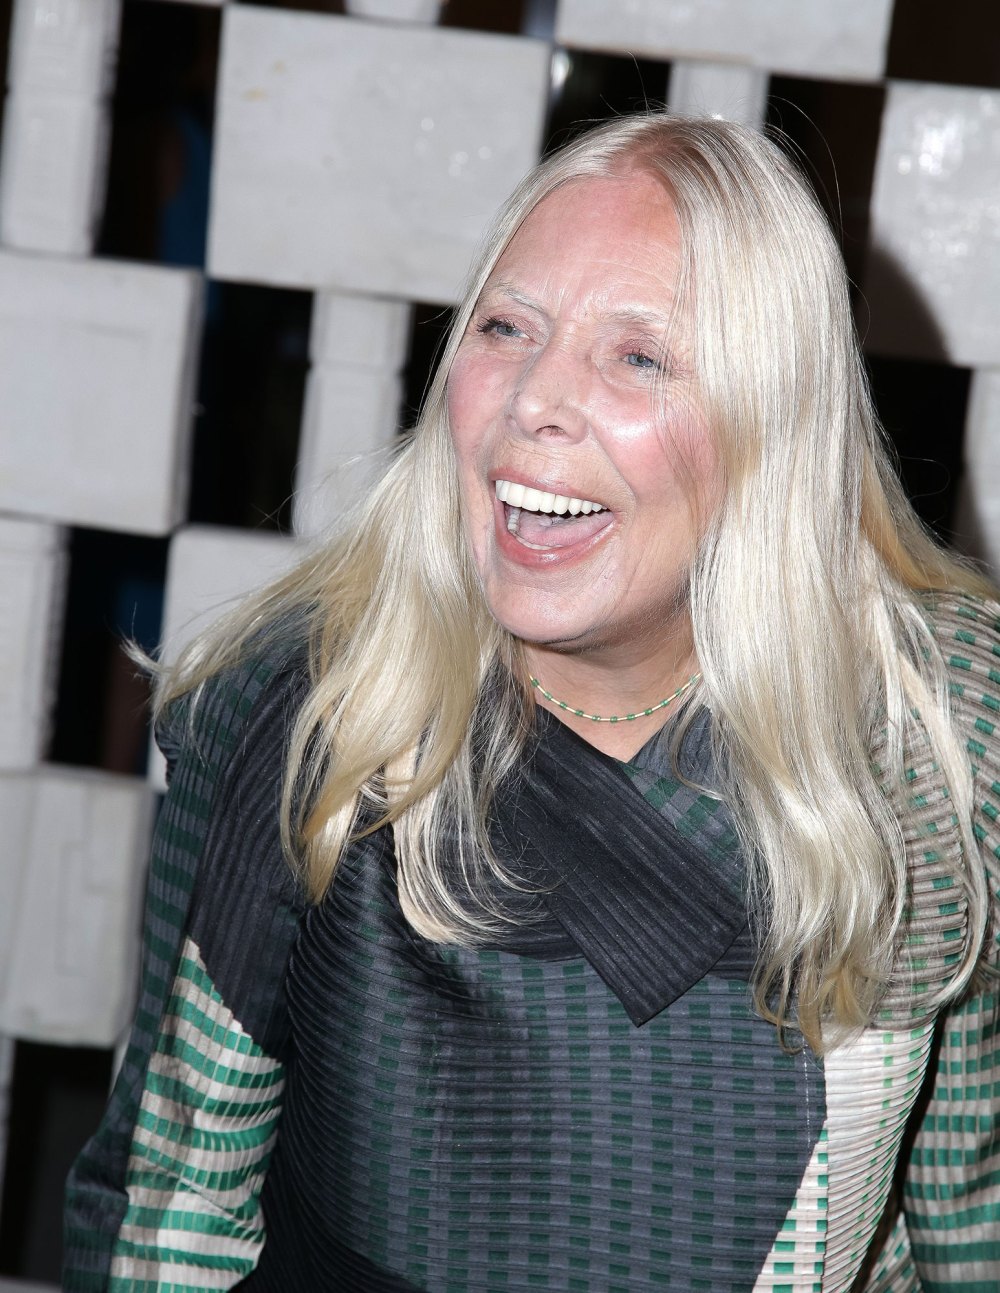 Joni Mitchell Has Made “Remarkable Progress” After Aneurysm